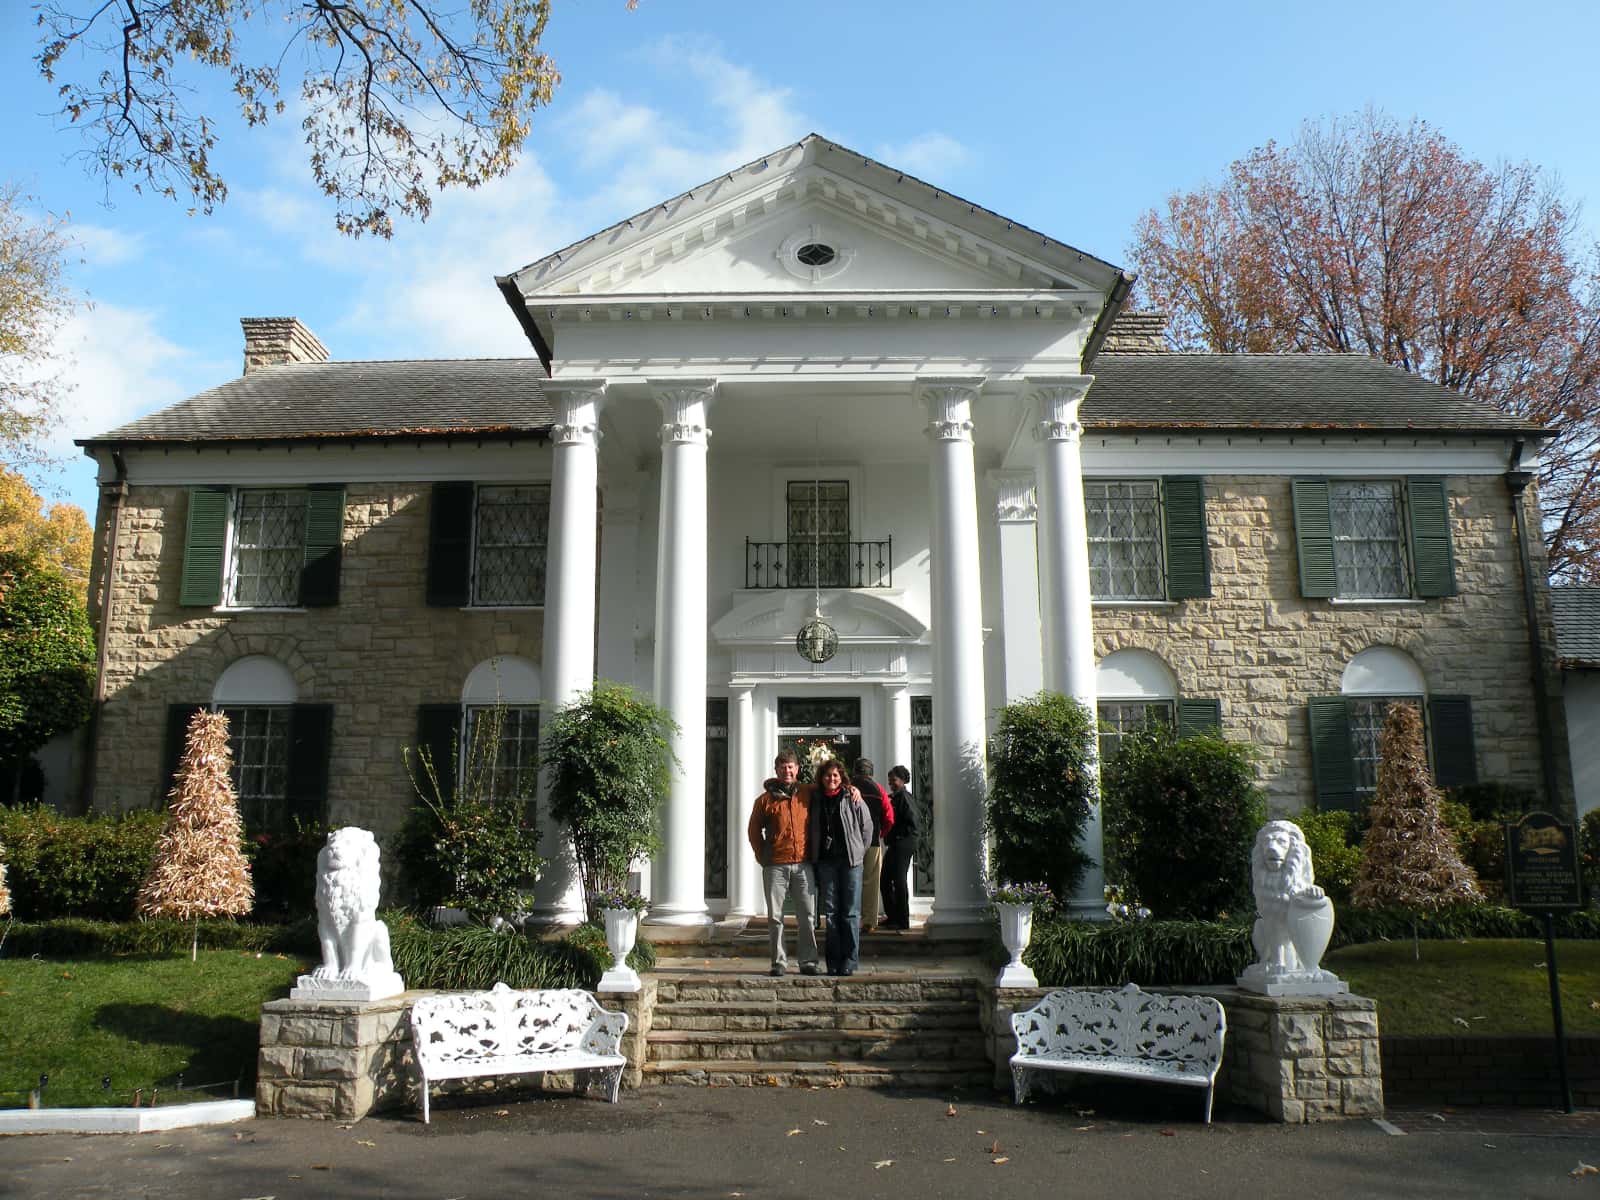 Man and woman standing outside Graceland building